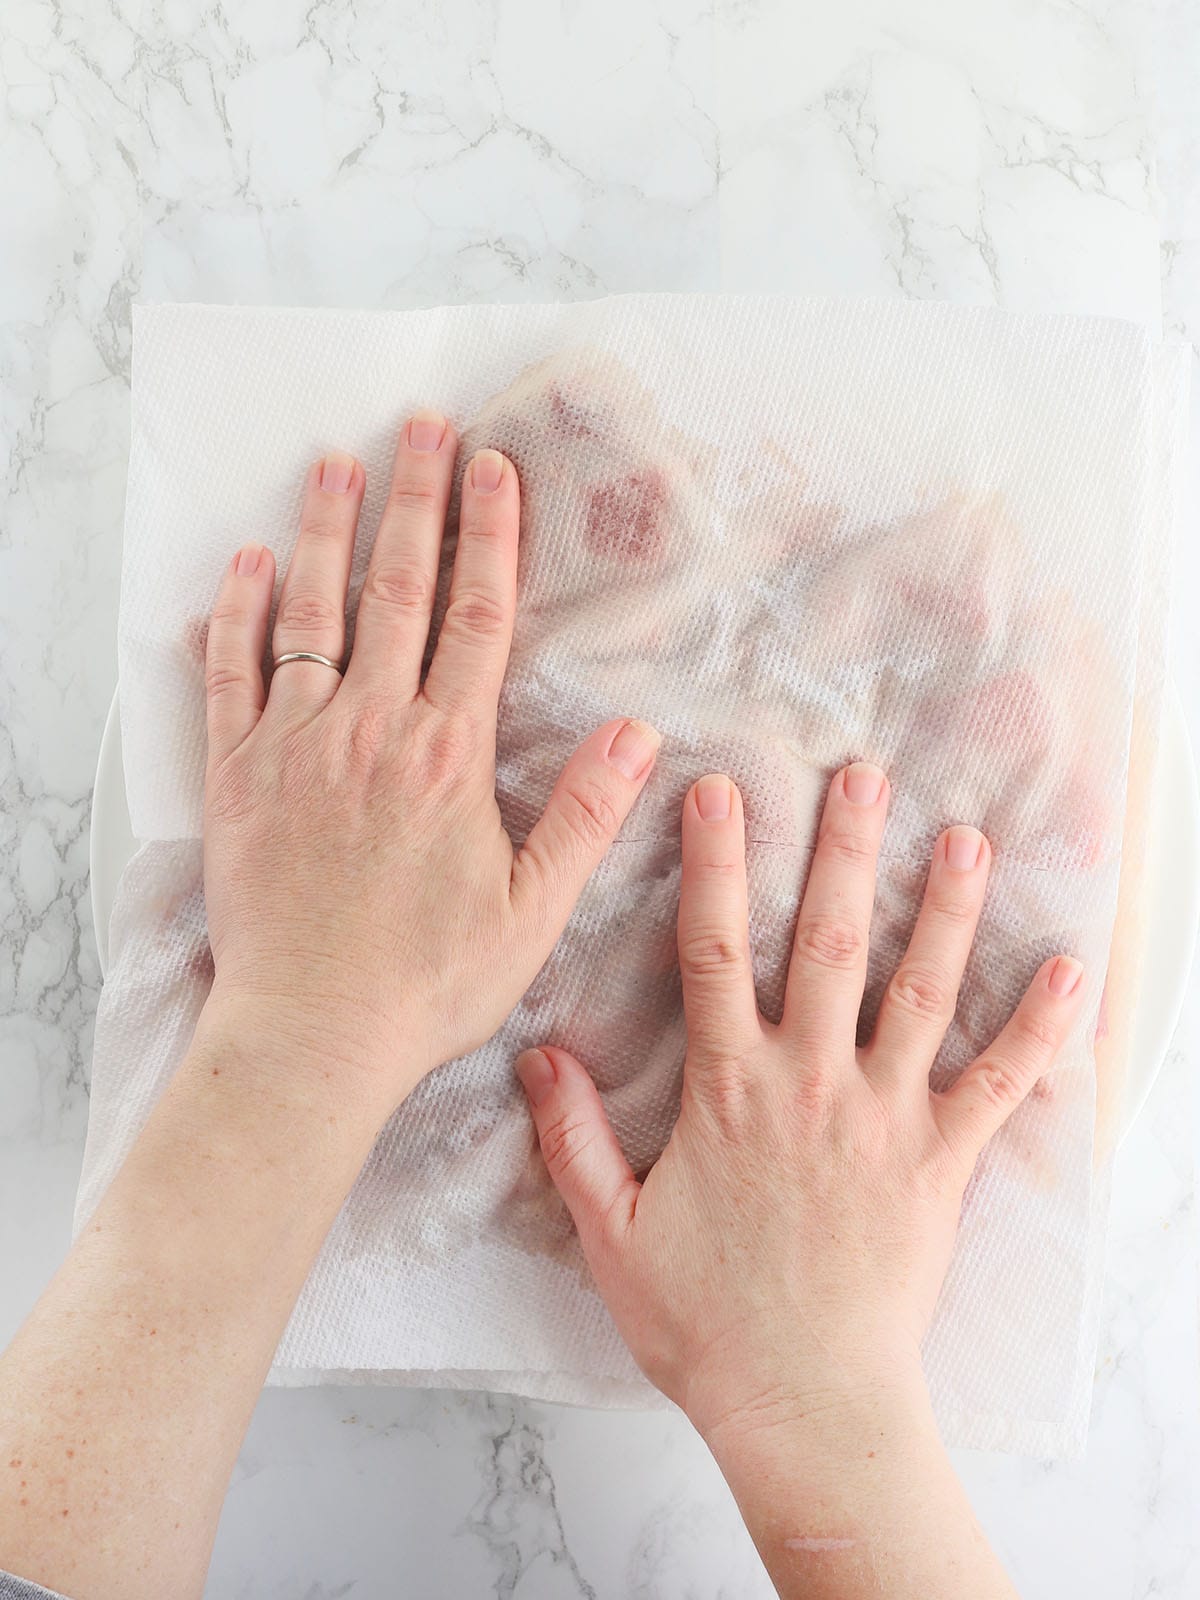 Hands blotting excess water from raw steak tips.